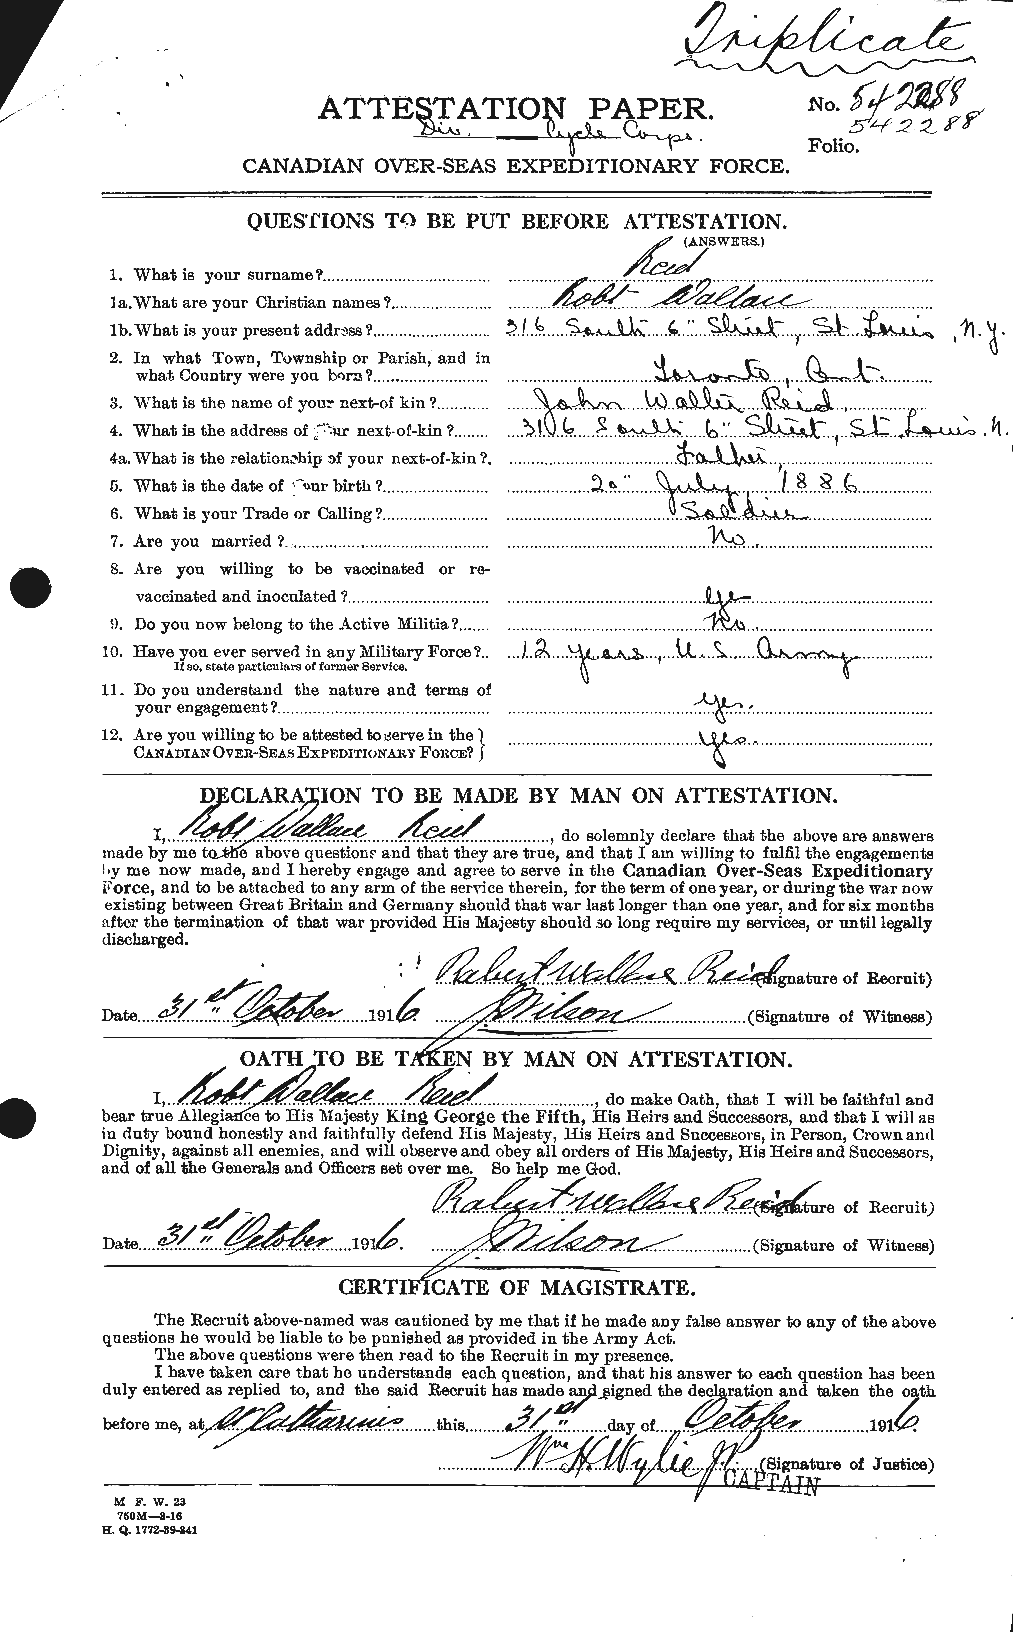 Personnel Records of the First World War - CEF 601925a